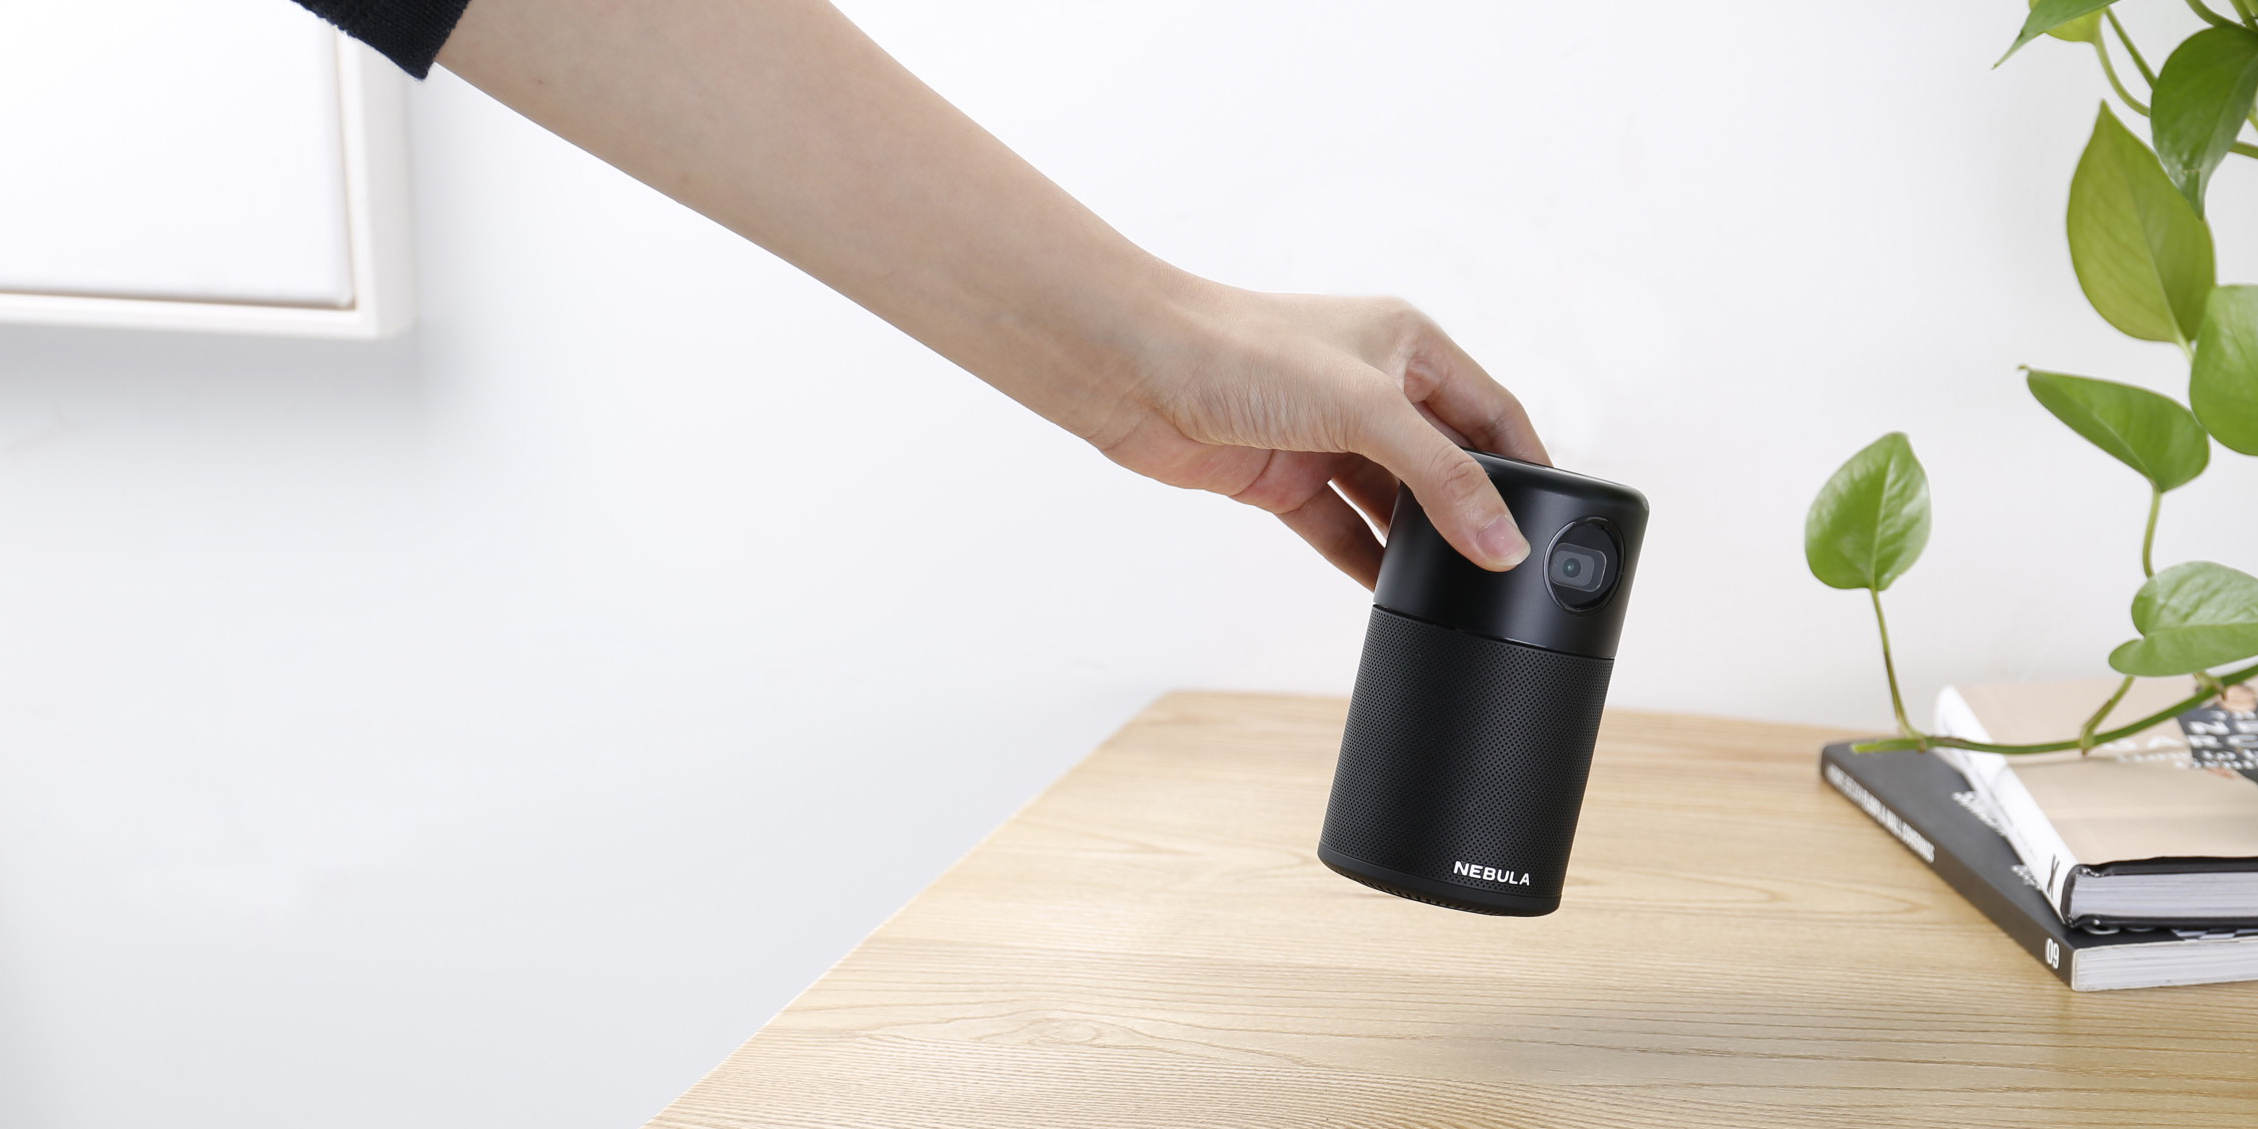 Anker unveils new AirPlay-enabled Capsule Portable Projector - 9to5Mac